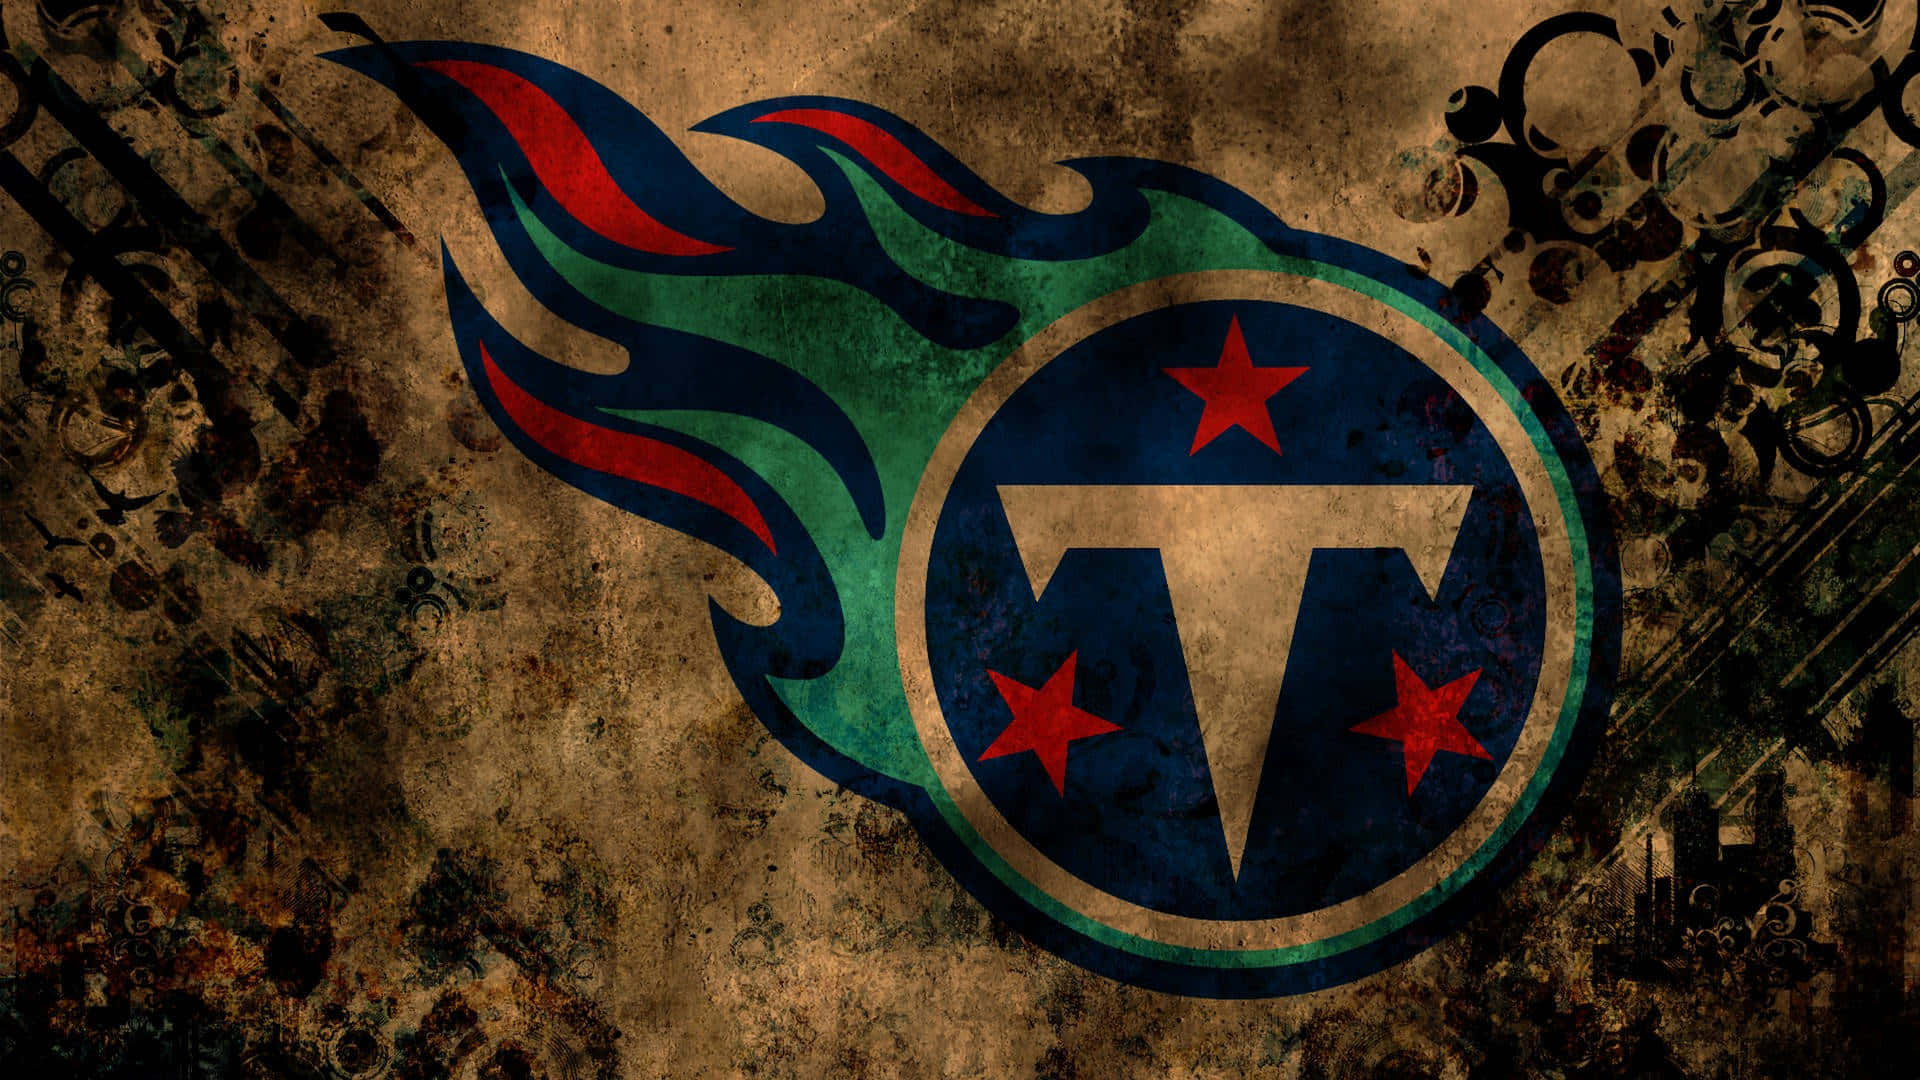 Show your spirit for your favorite NFL team - the Tennessee Titans! Wallpaper